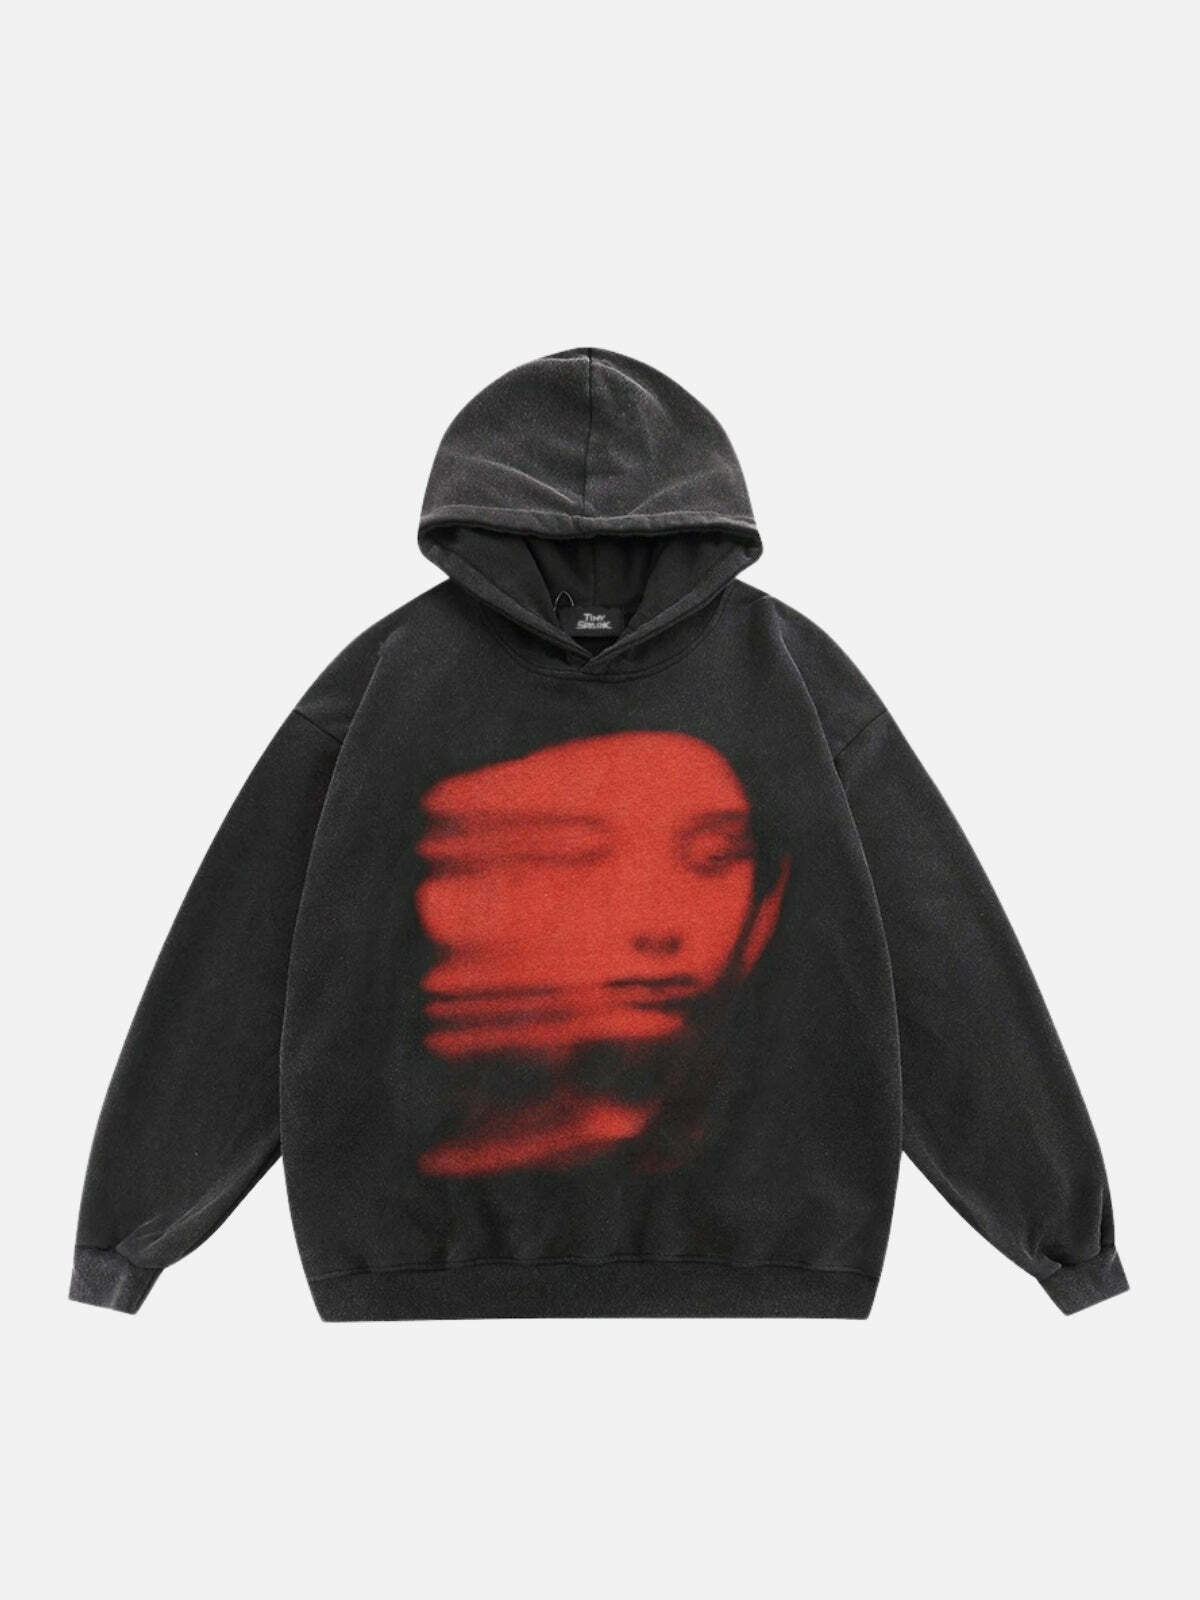 ghost shadow graphic hoodie edgy & mysterious streetwear 6305